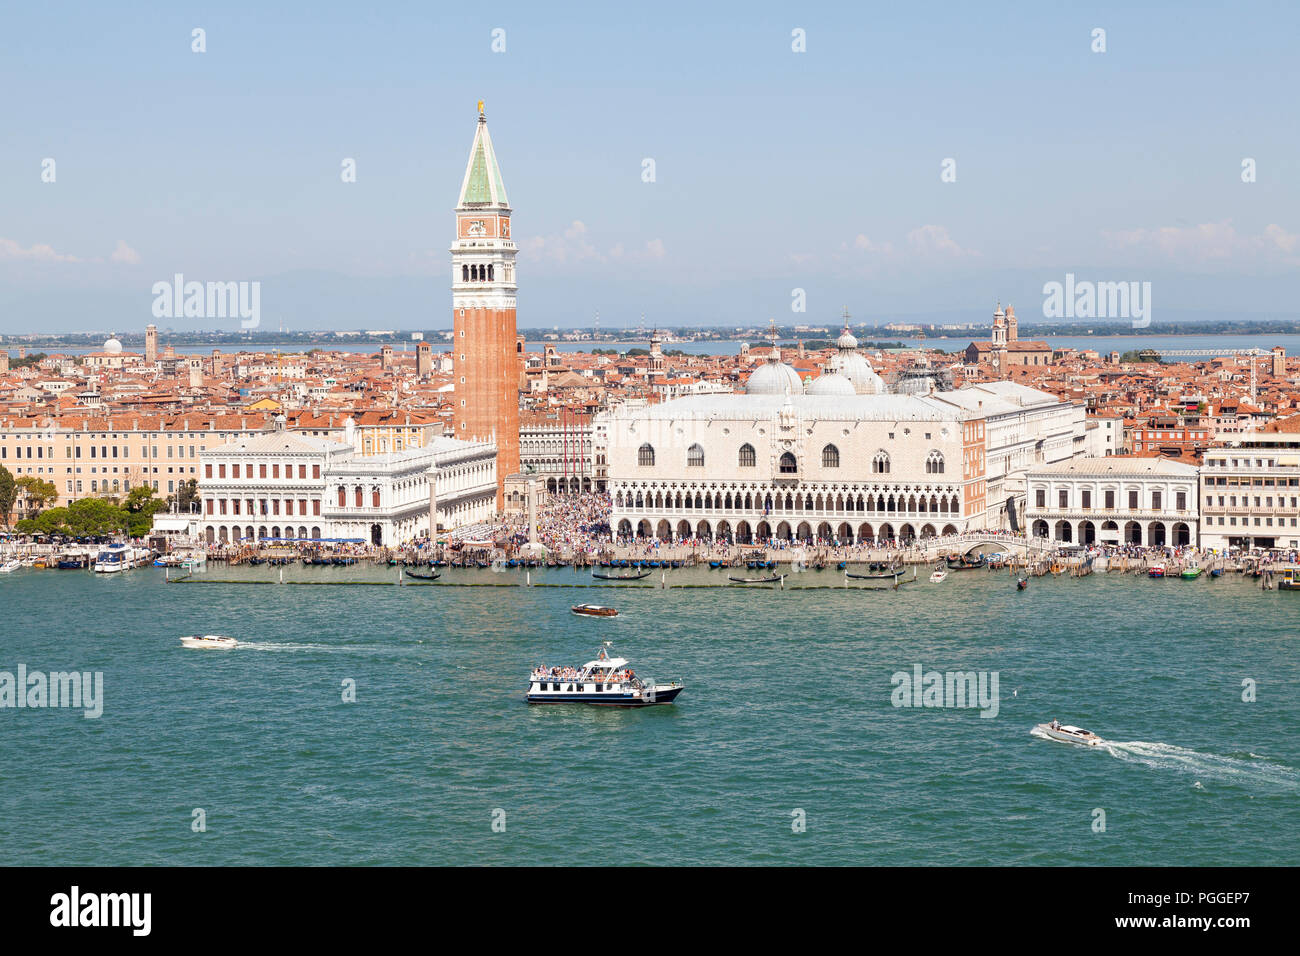 Aerial view Doges Palace and St Marks Campanile, Venice, Veneto, Italy with a view over the rooftops of the city and lagoon to the mainland. Tourist b Stock Photo